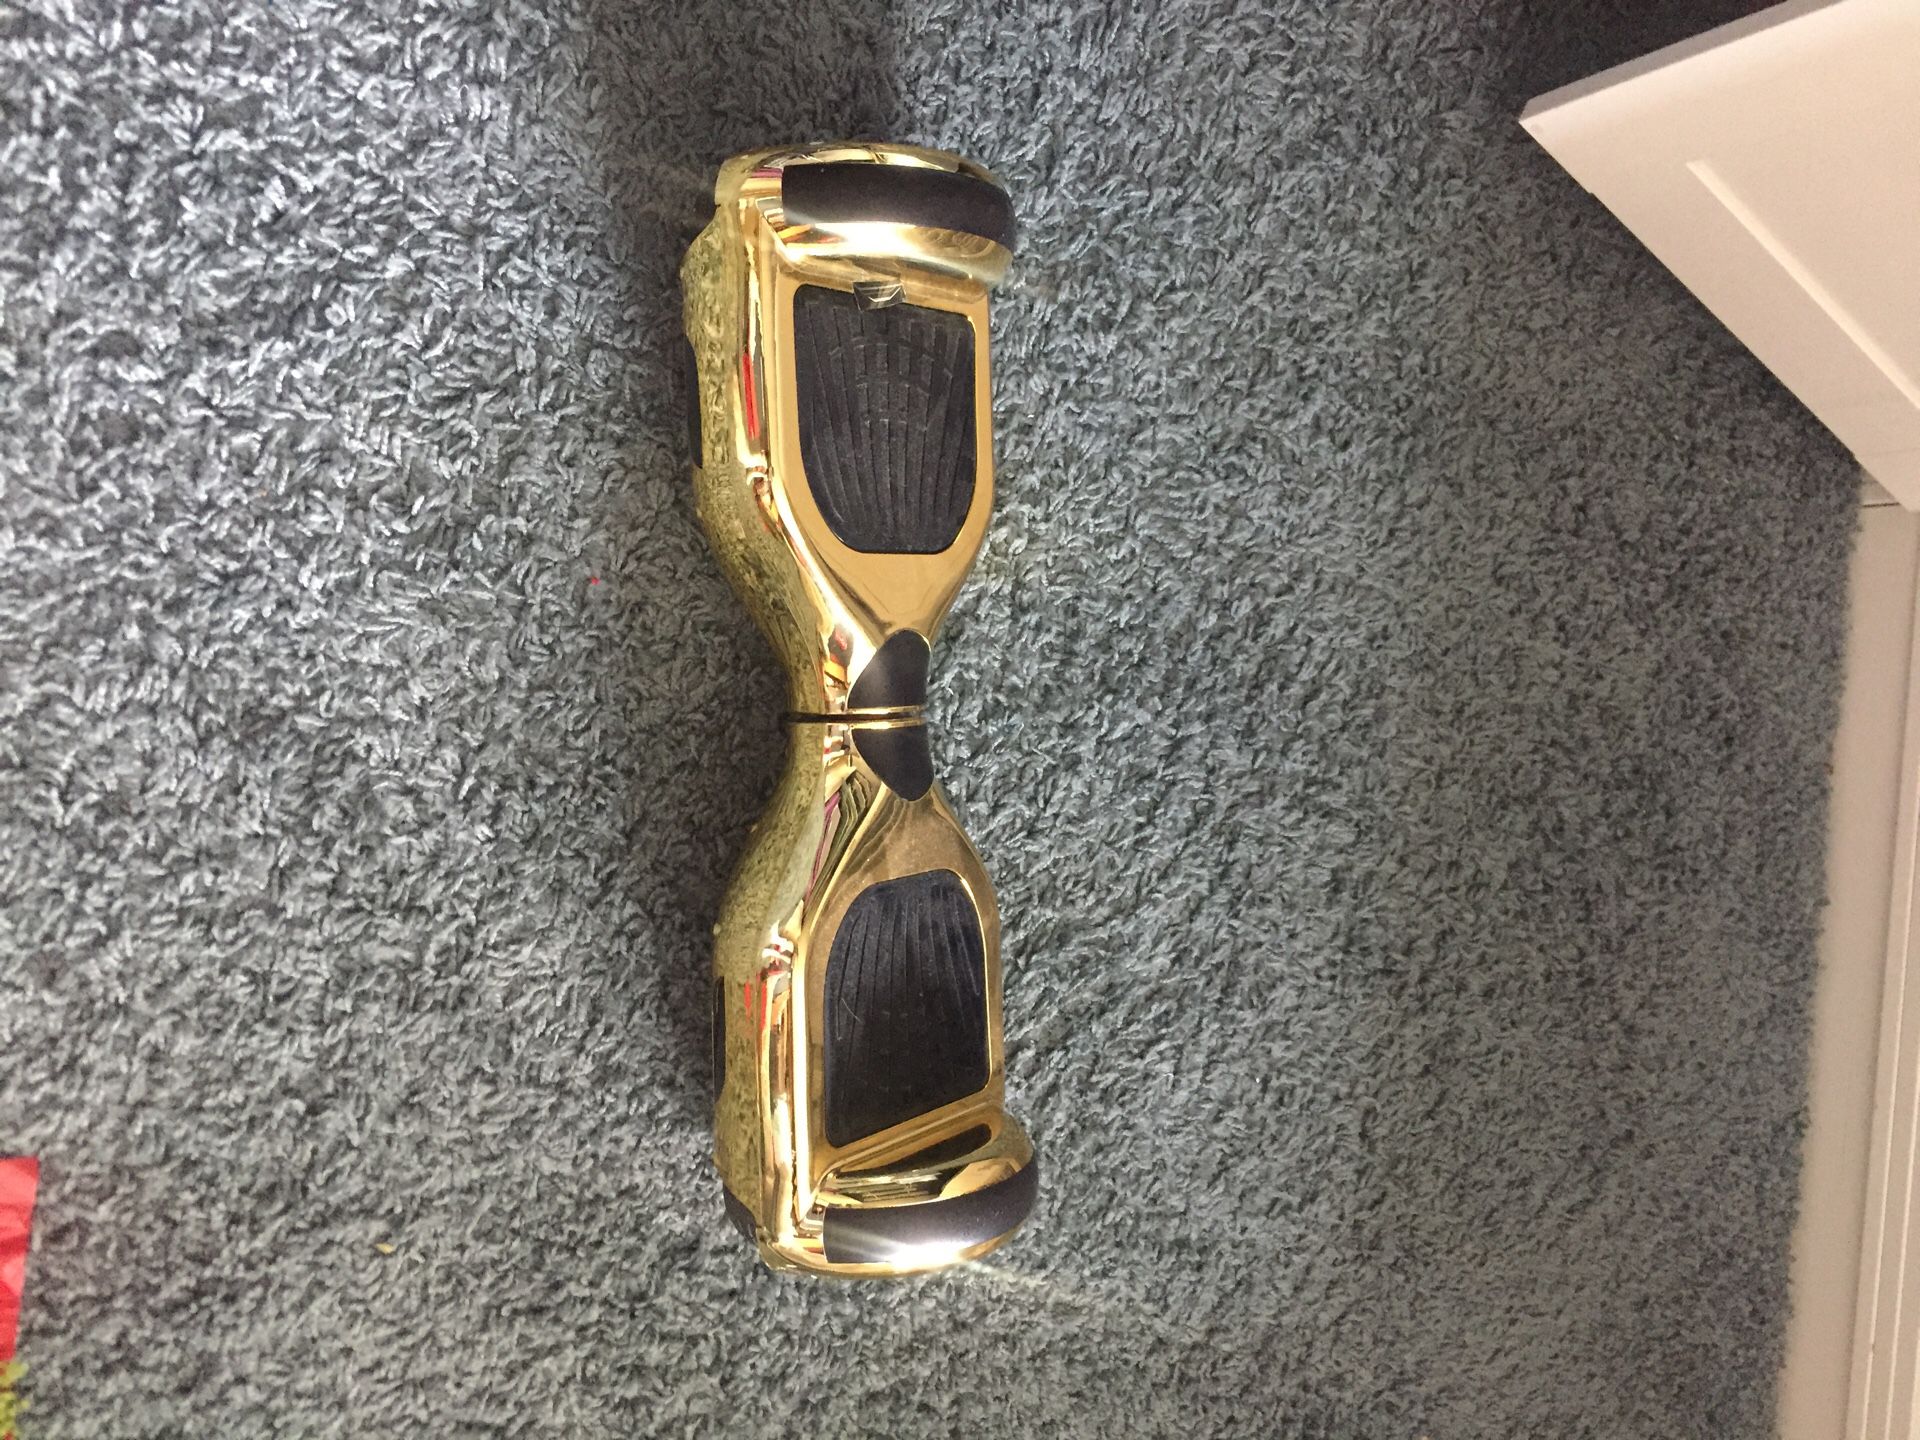 Hover heart GOLD Bluetooth hoverboard! As is